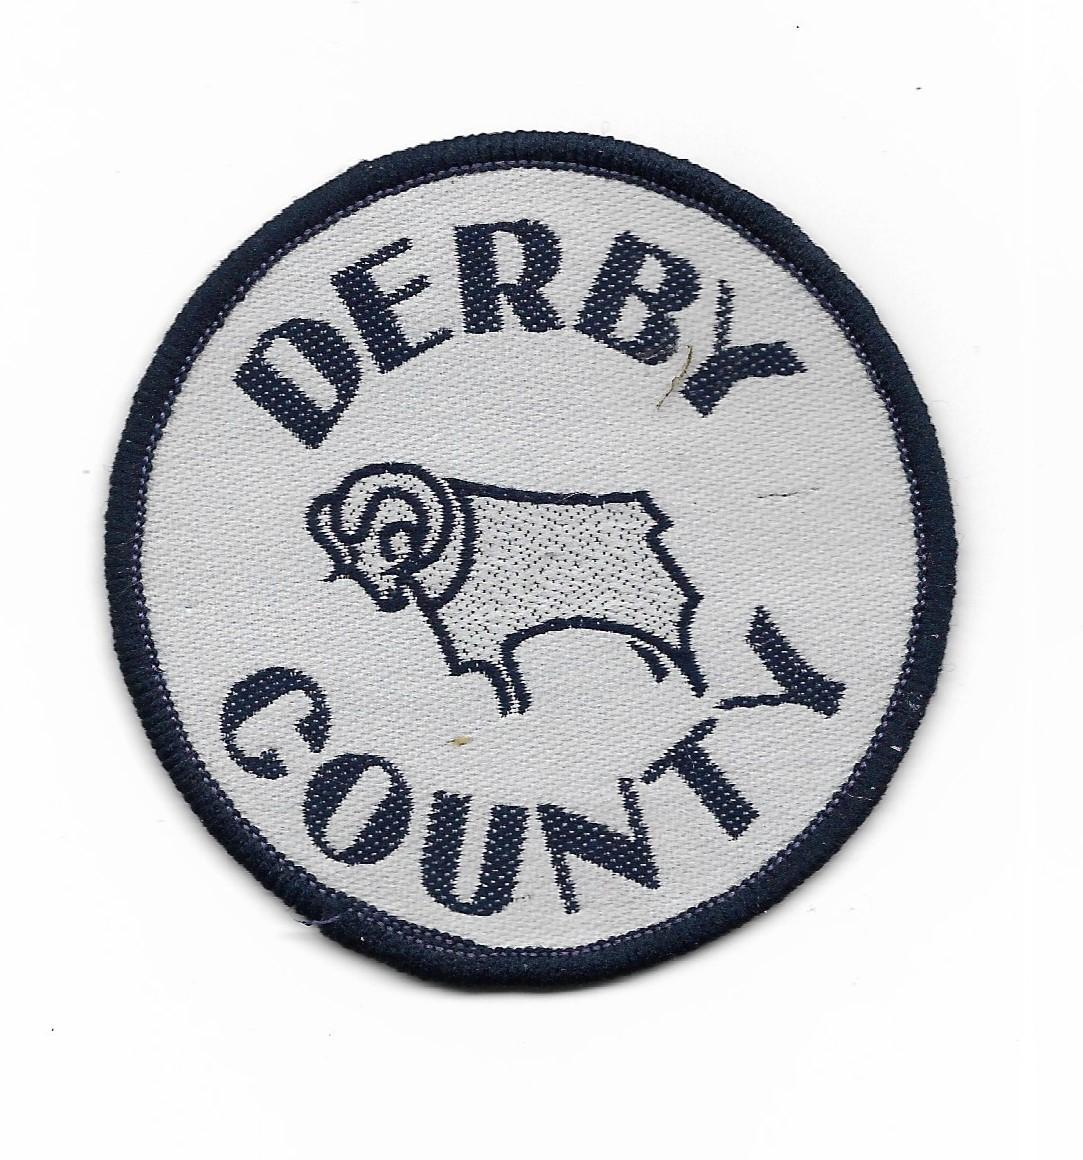 DERBY_COUNTY_ENGLAND_(нашивк а)